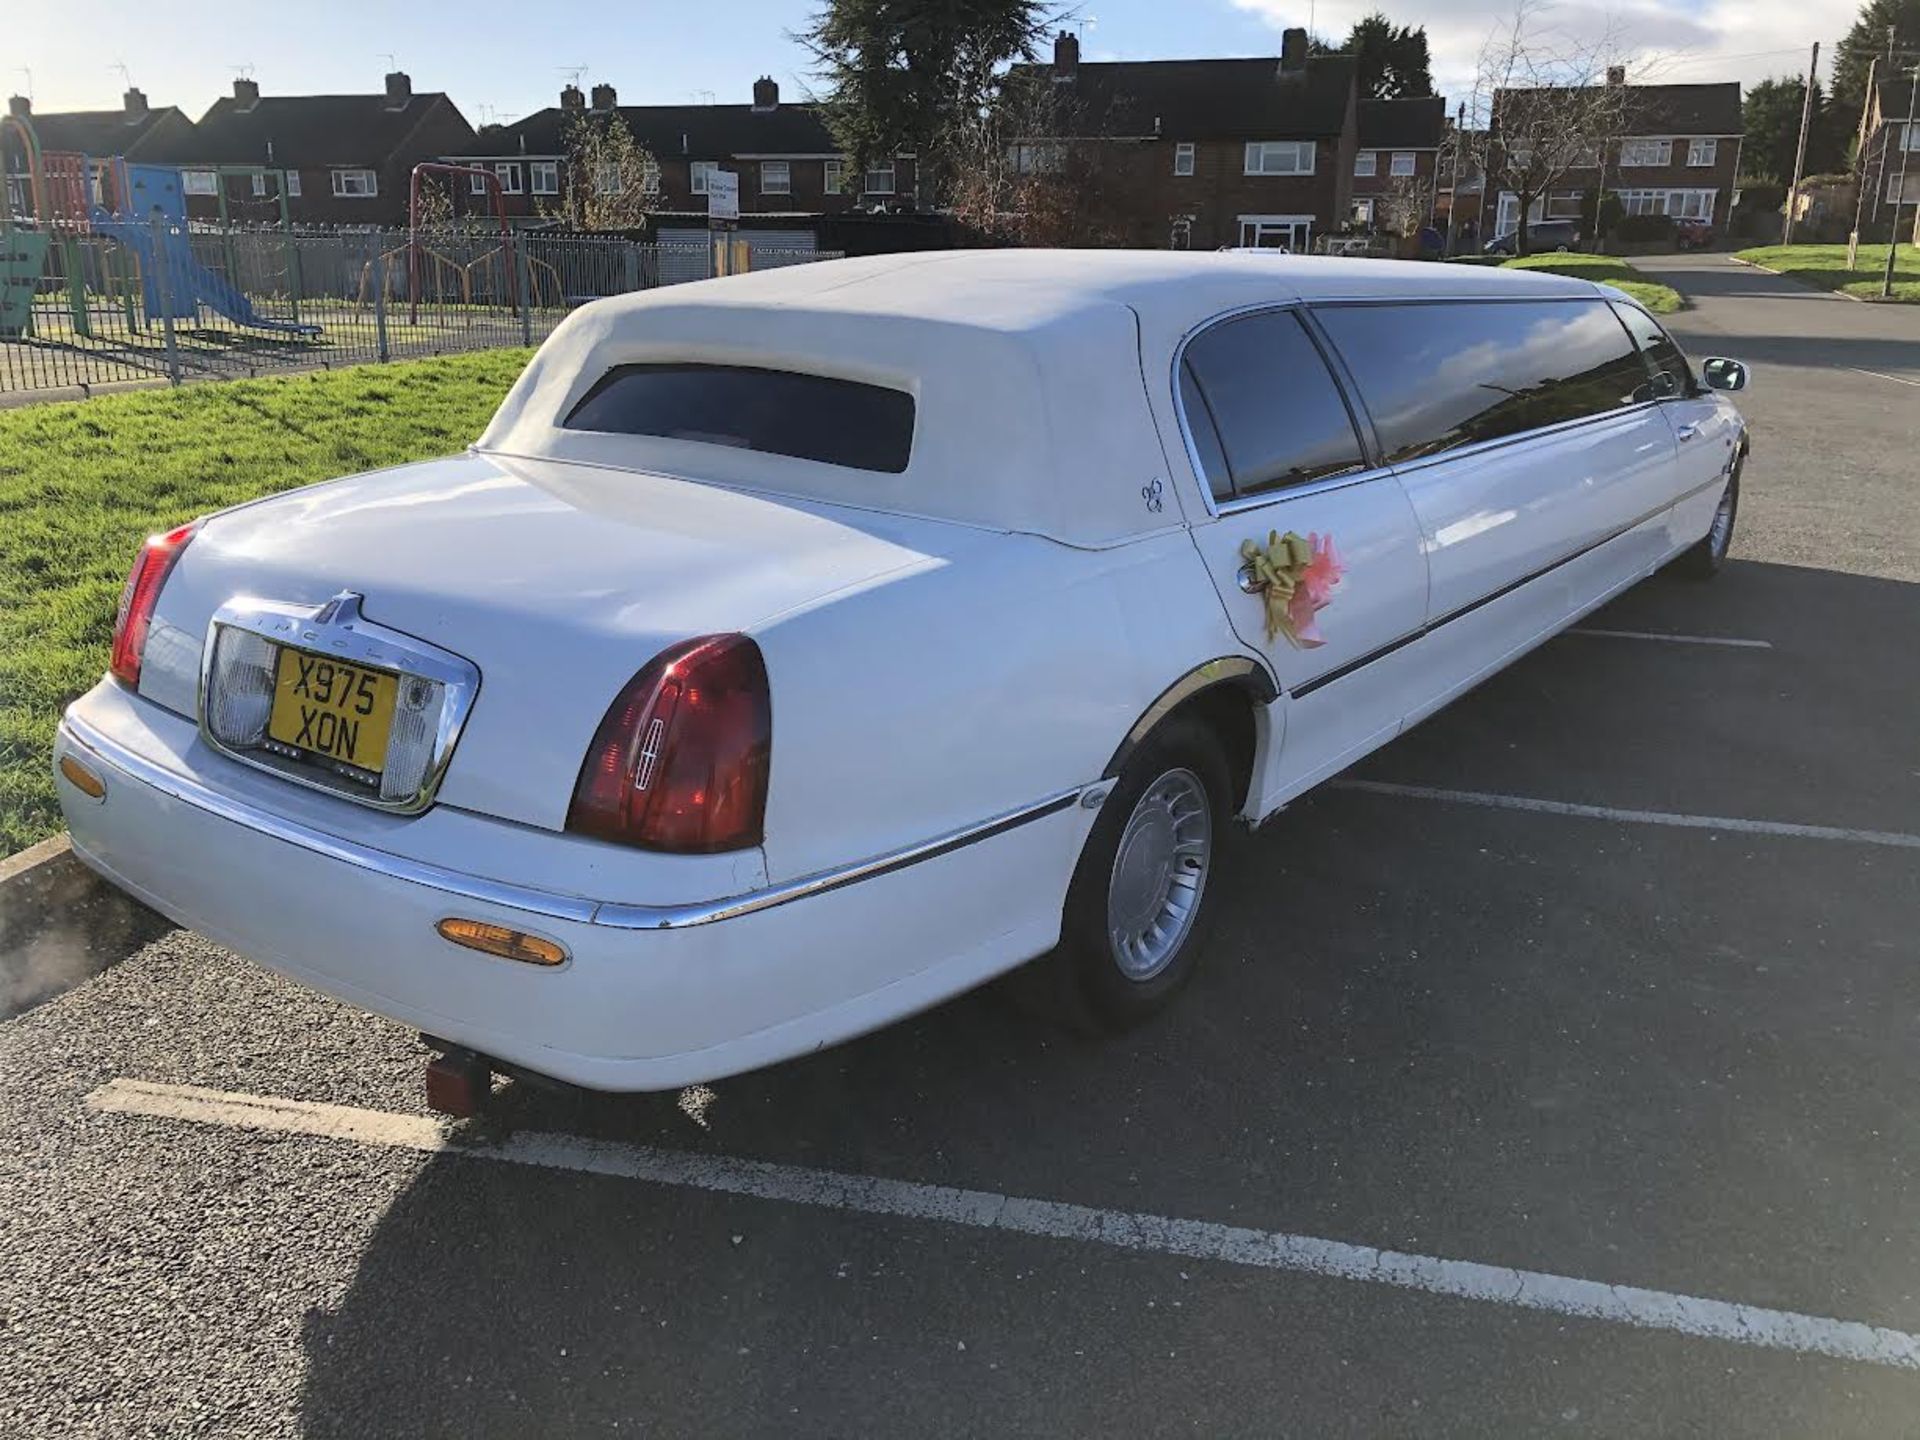 2001 LINCOLN TOWN CAR AUTO WHITE 10 SEATER LIMOUSINE WEDDING CAR *NO VAT* - Image 6 of 17